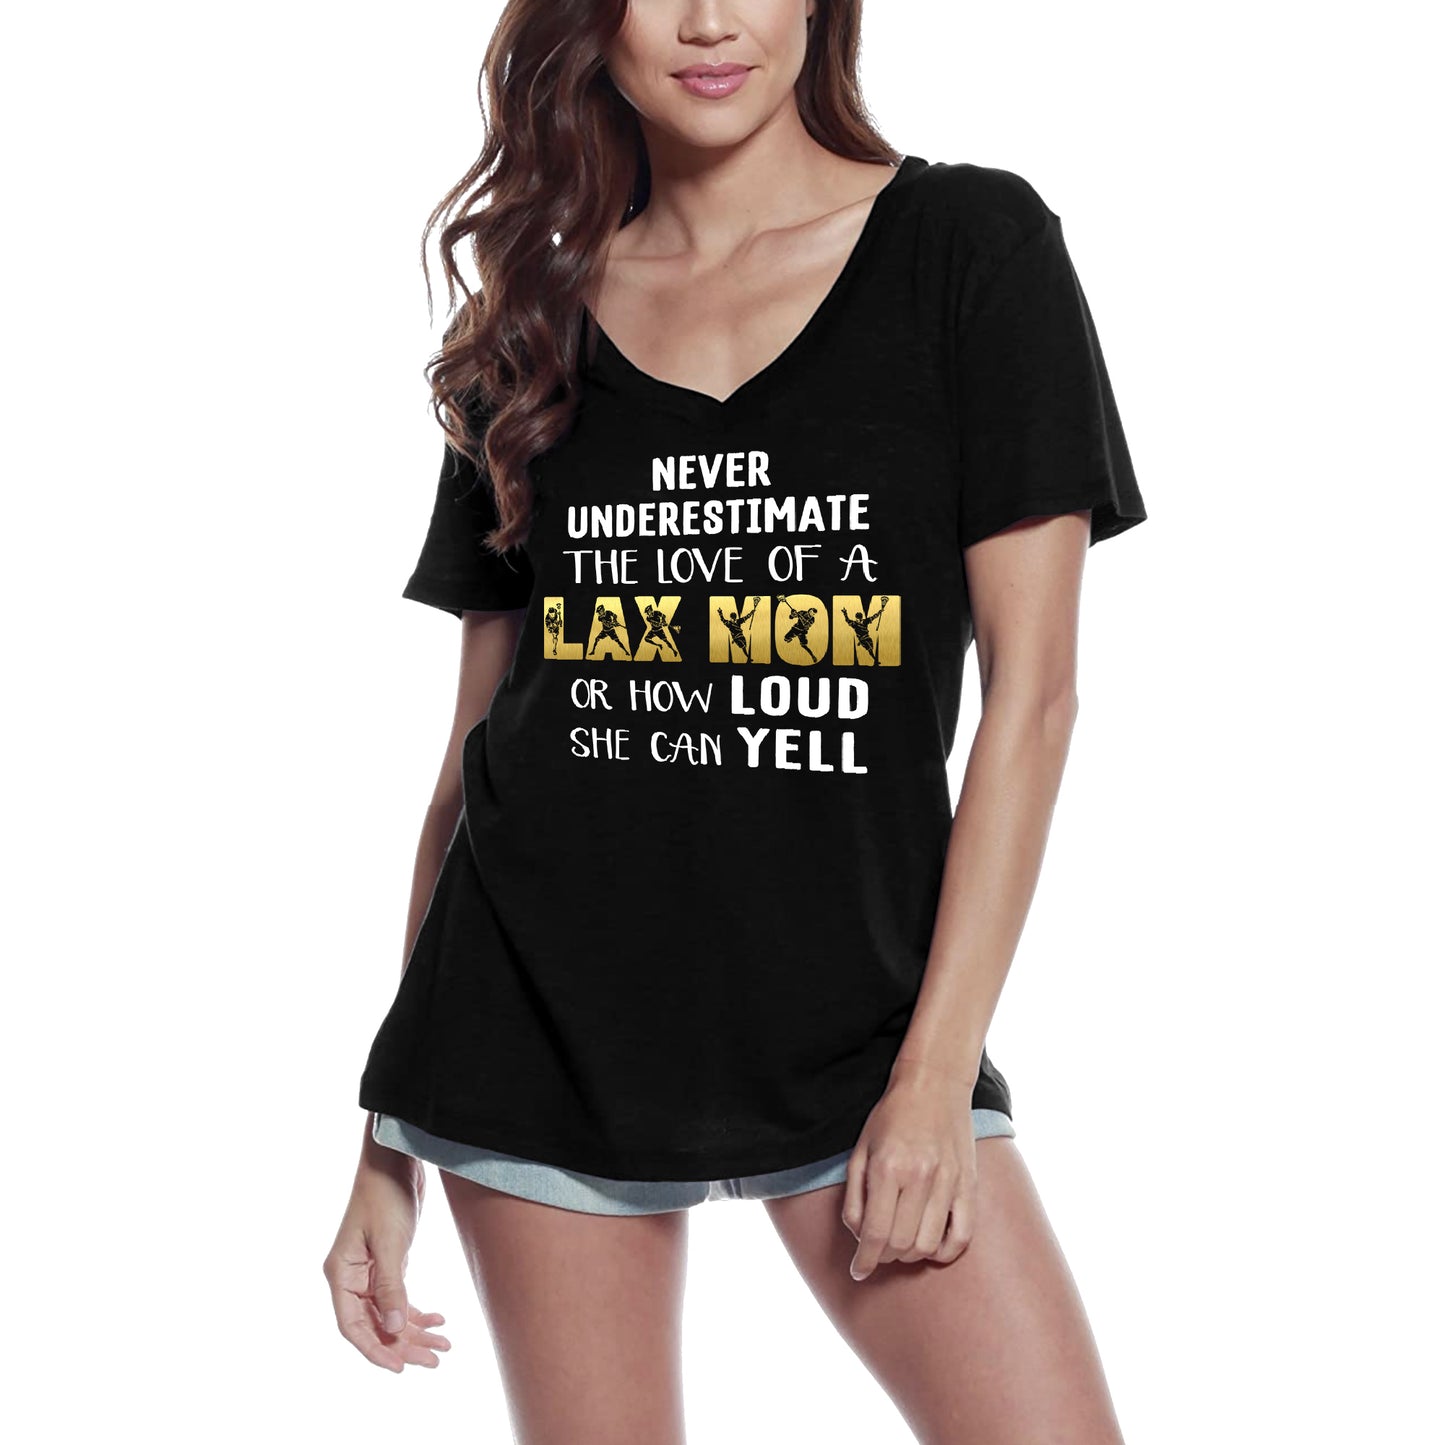 ULTRABASIC Women's V-Neck T-Shirt Never Underestimate The Love Of a Lax Mom - Funny Quote